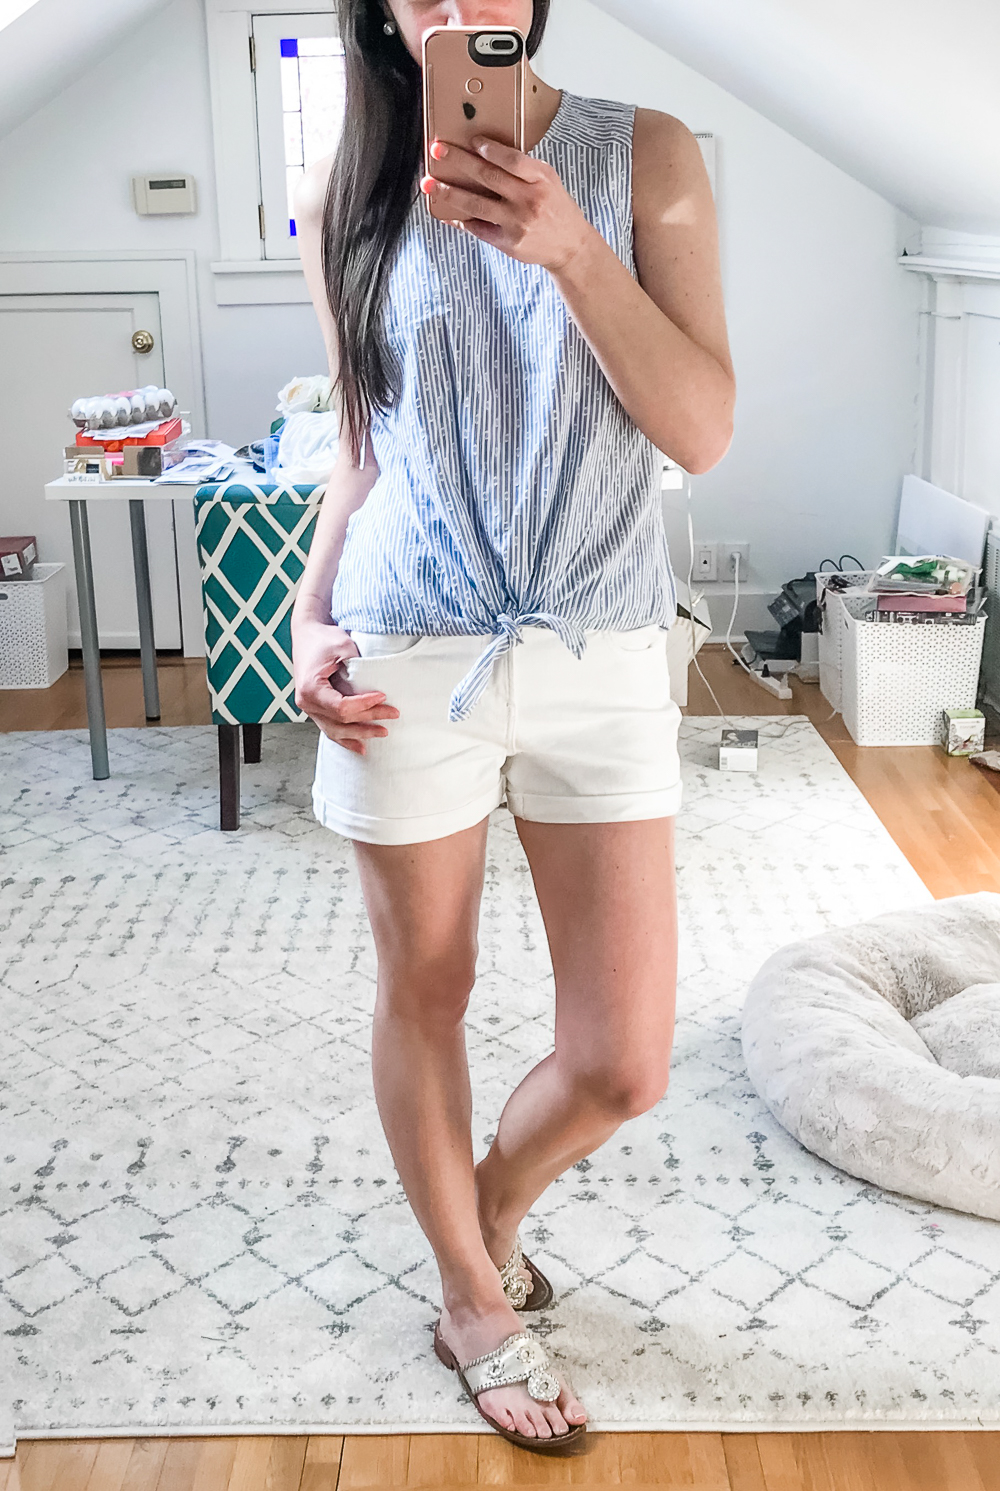 Old Navy White Denim Shorts 3-Inch Inseam, Old Navy Sleeveless Tie-Hem Top, Old Navy Try-On Haul: Best of Spring 2019 by Stephanie Ziajka from the popular affordable fashion blog Diary of a Debutante, Old Navy Spring 2019 Try-On Haul, Spring Try-On Haul